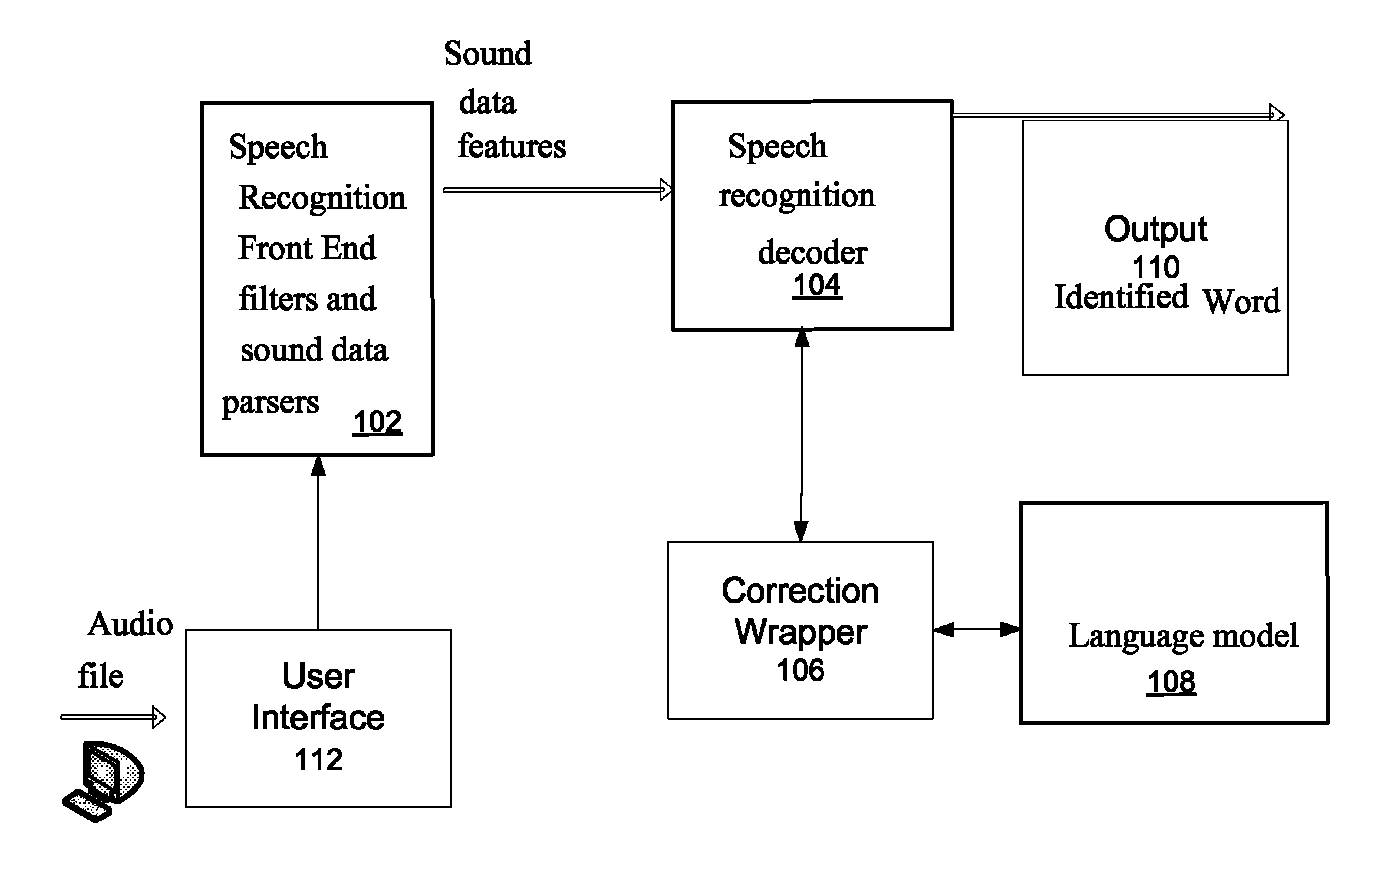 Speech recognition system